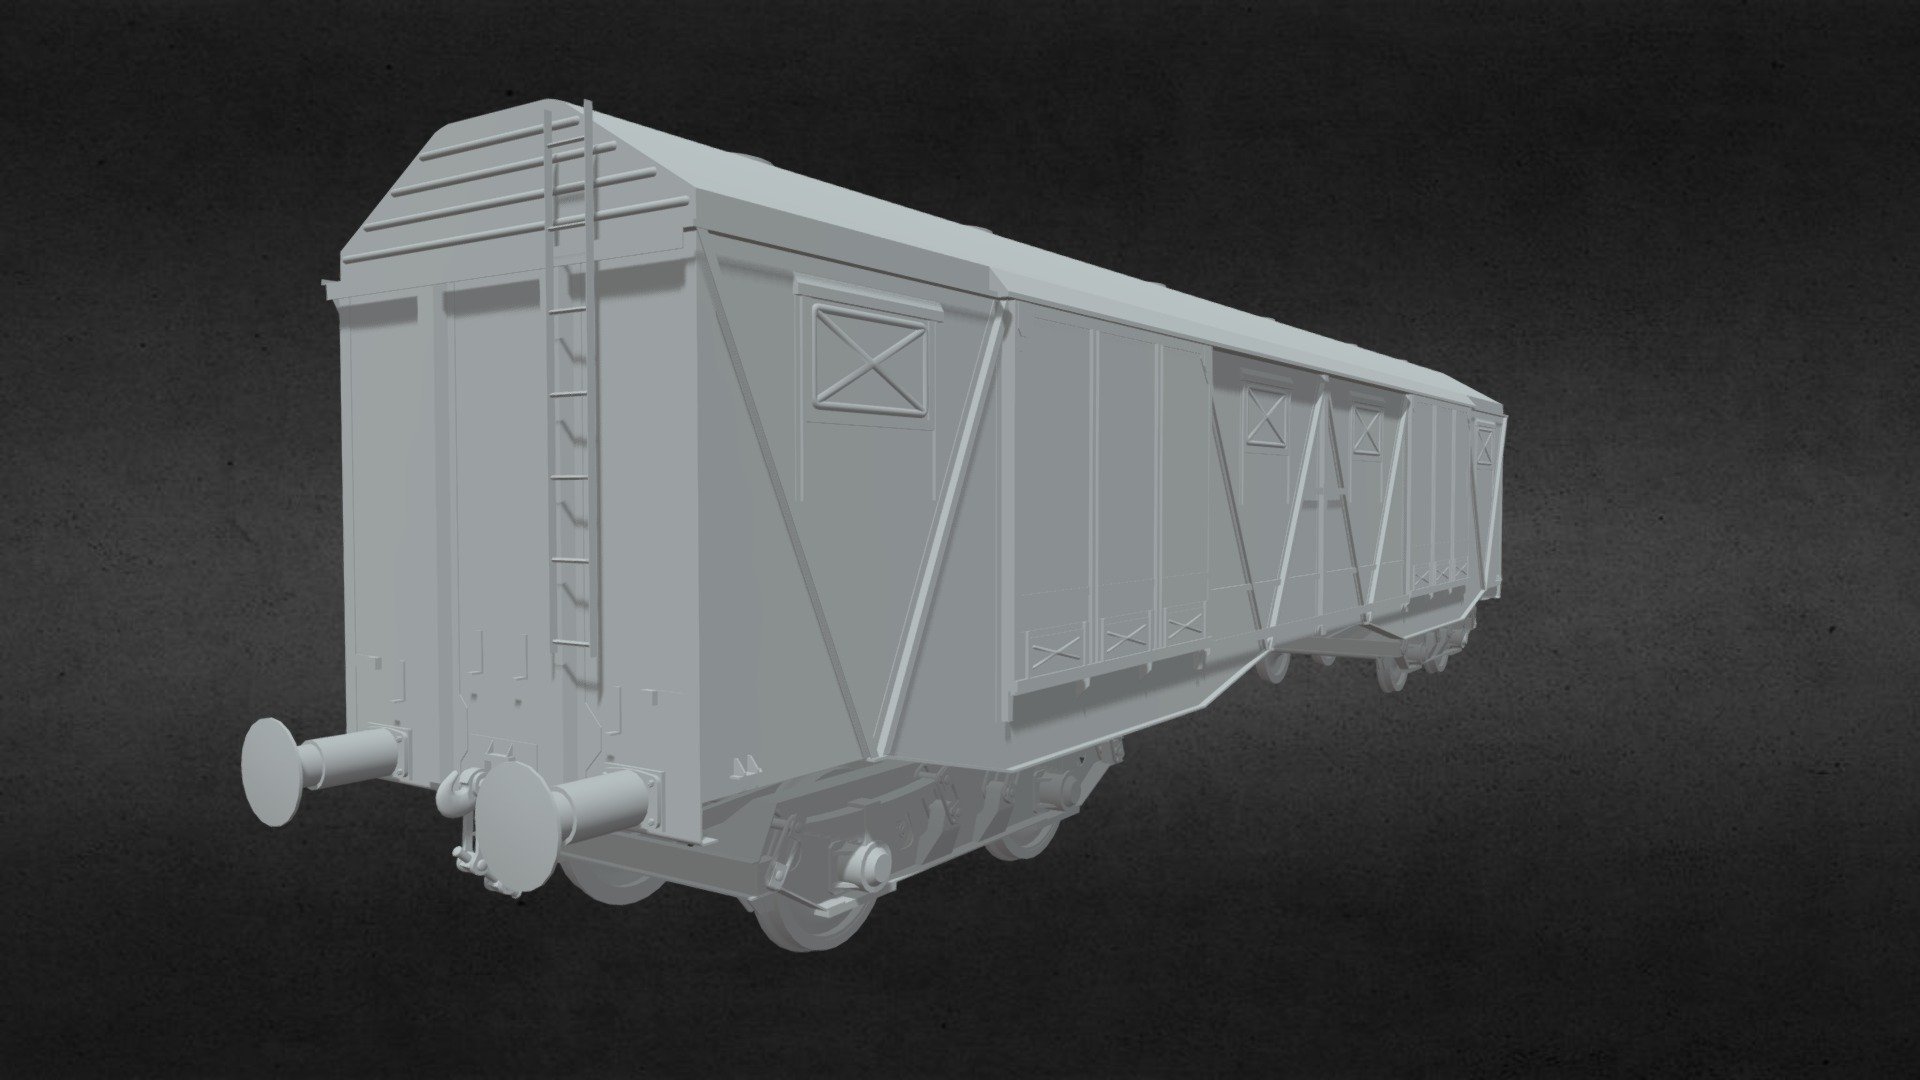 There is still some work to do, but most of the model is done - Railcar Type - Gags 401K (W.I.P) - 3D model by Szakal (@Grabka) 3d model